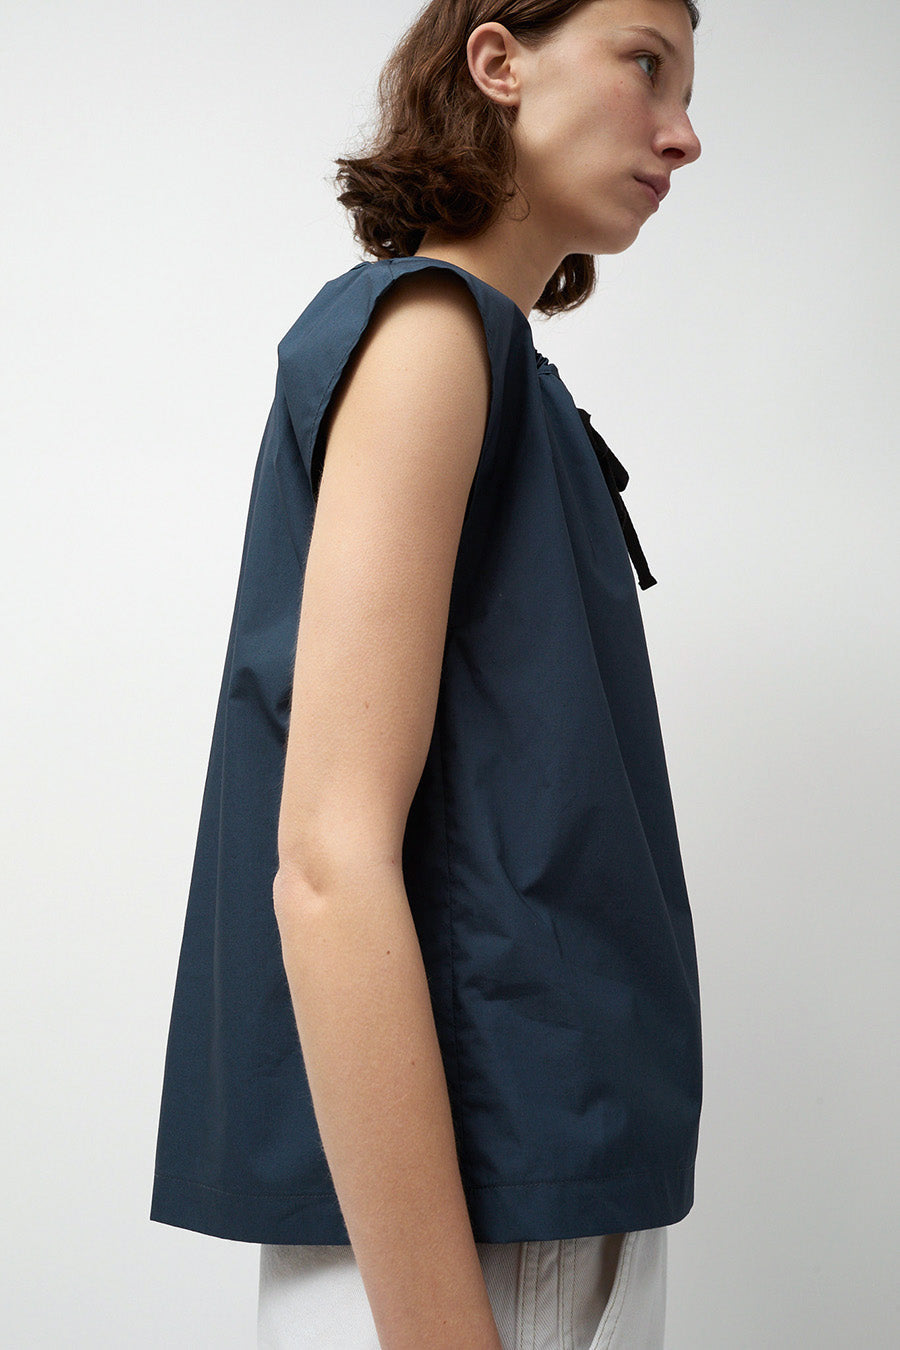 Rue Blanche Polo Top in Navy